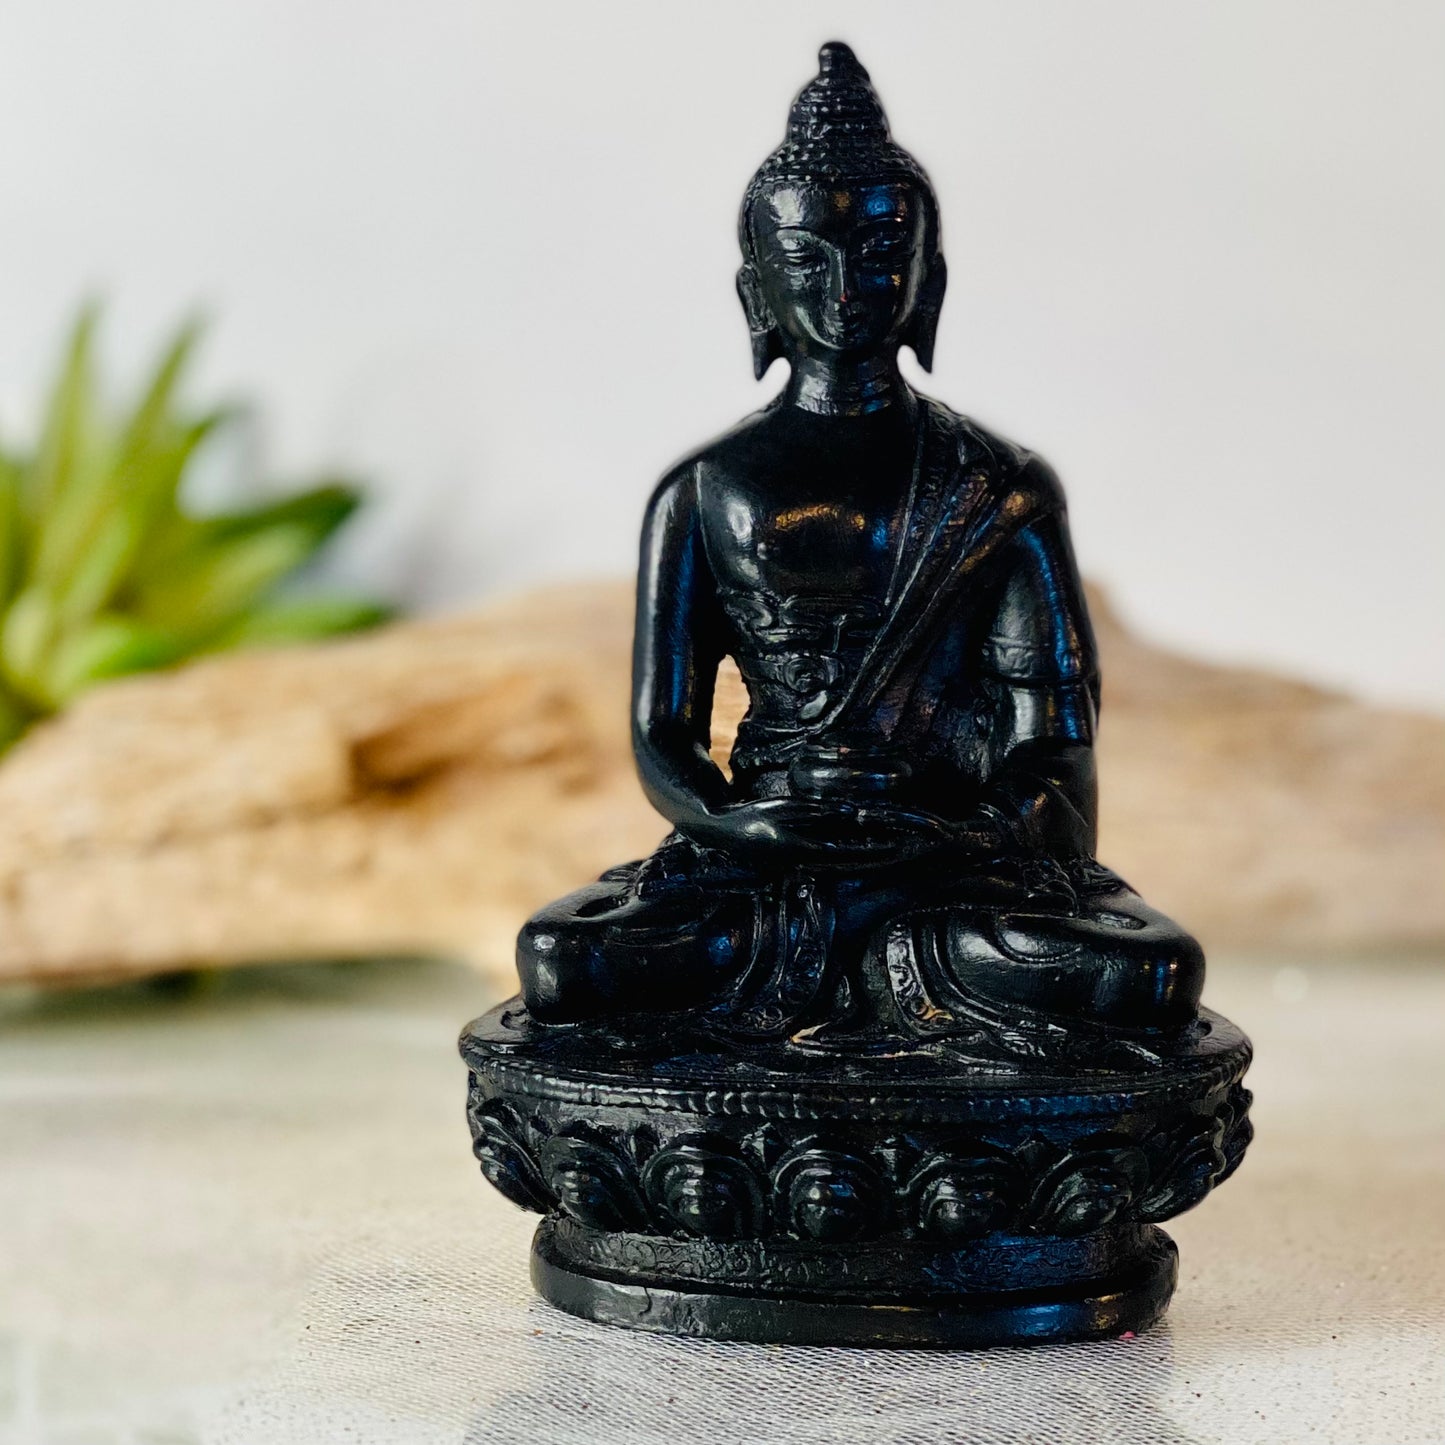 Sacred Serenity: Authentic Black Buddha Statue from Nepal with Healing Energies